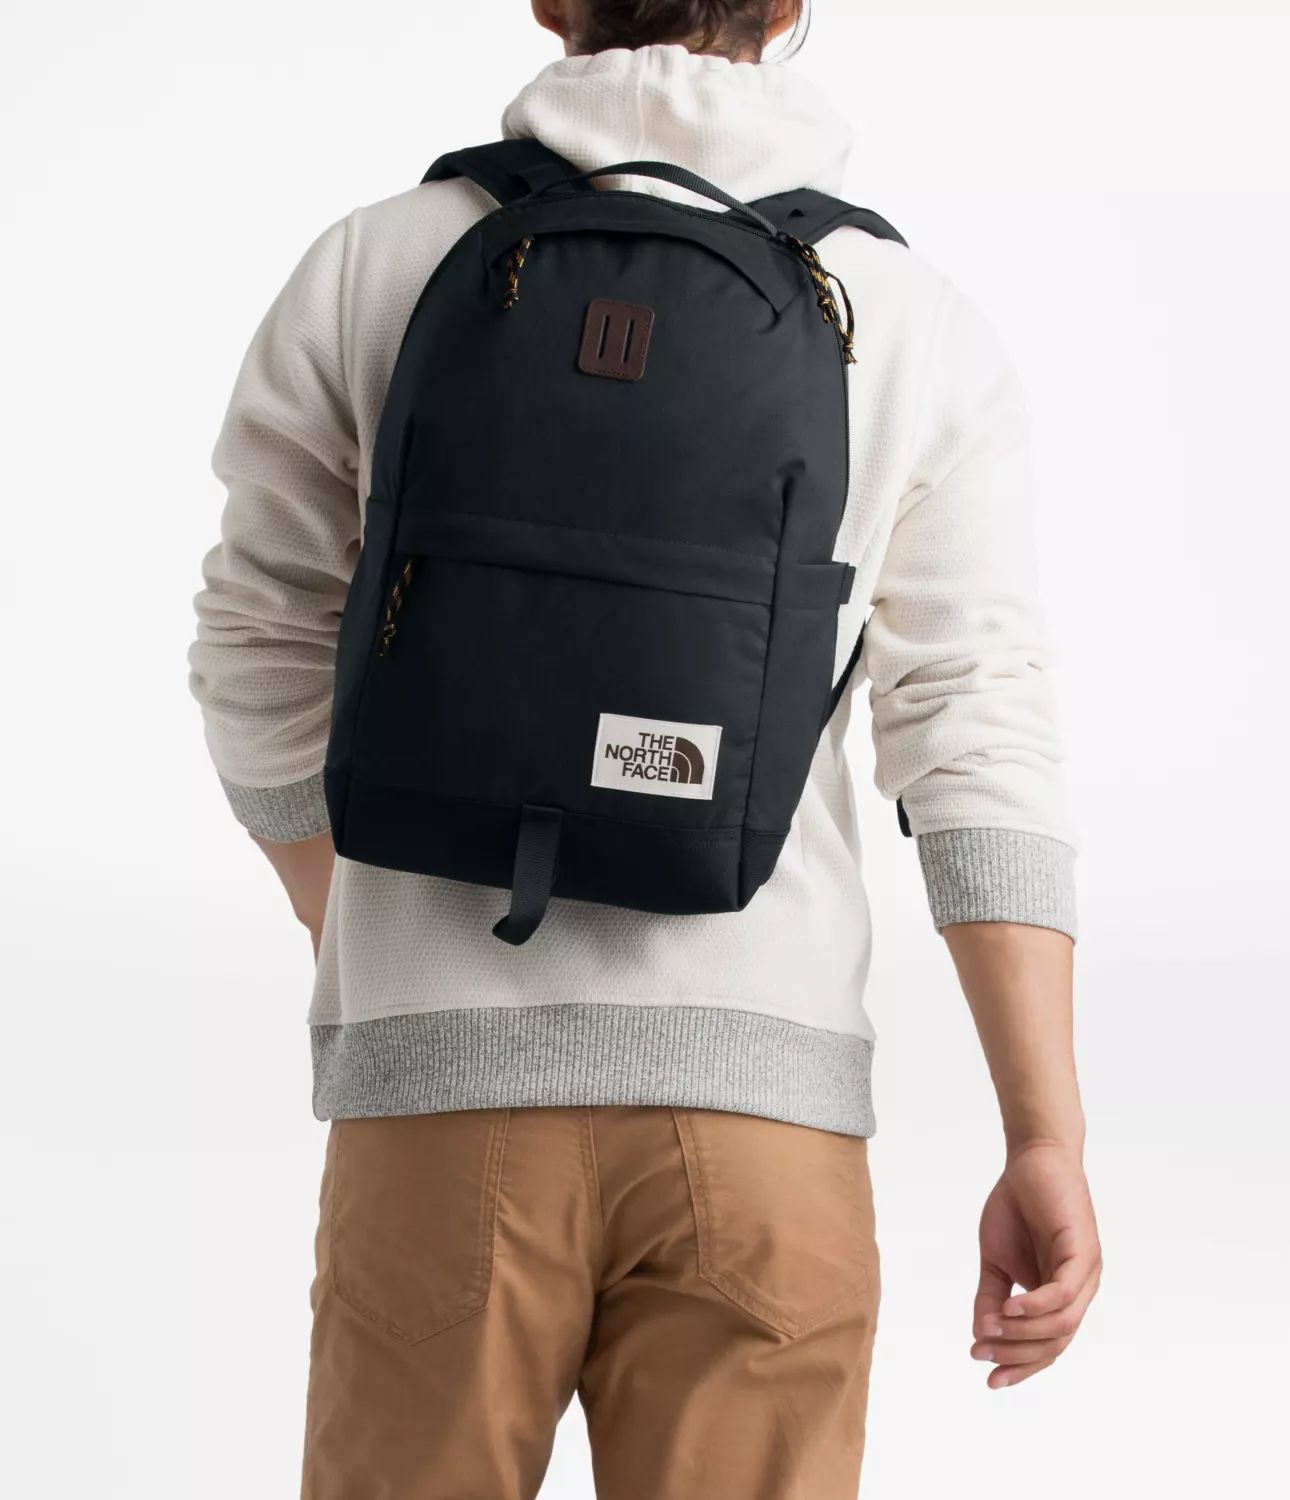 The North Face　DAYPACK 　NF0A3KY5 KS7